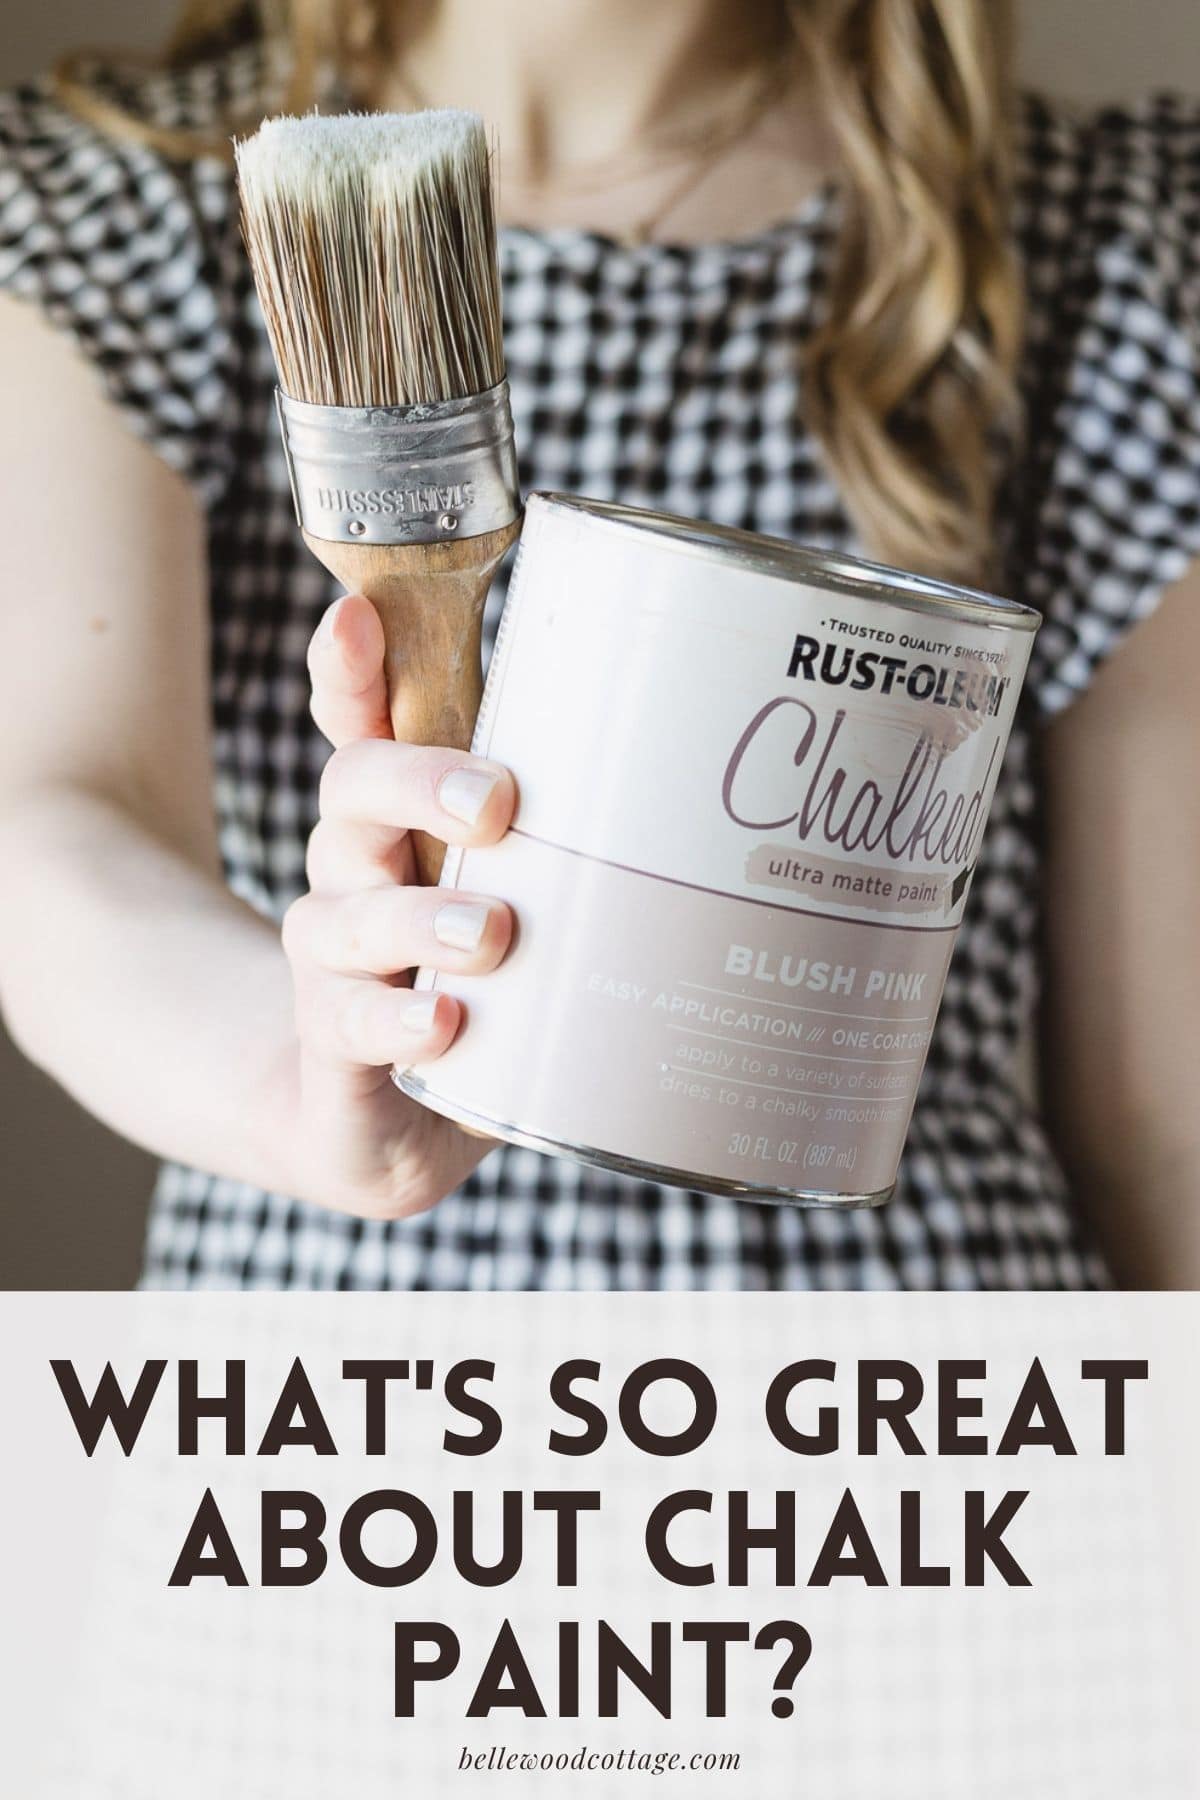 A woman in a dress holding a can of Rust-Oleum Chalked Paint and a paint brush with the words, "What's So Great About Chalk Paint???"